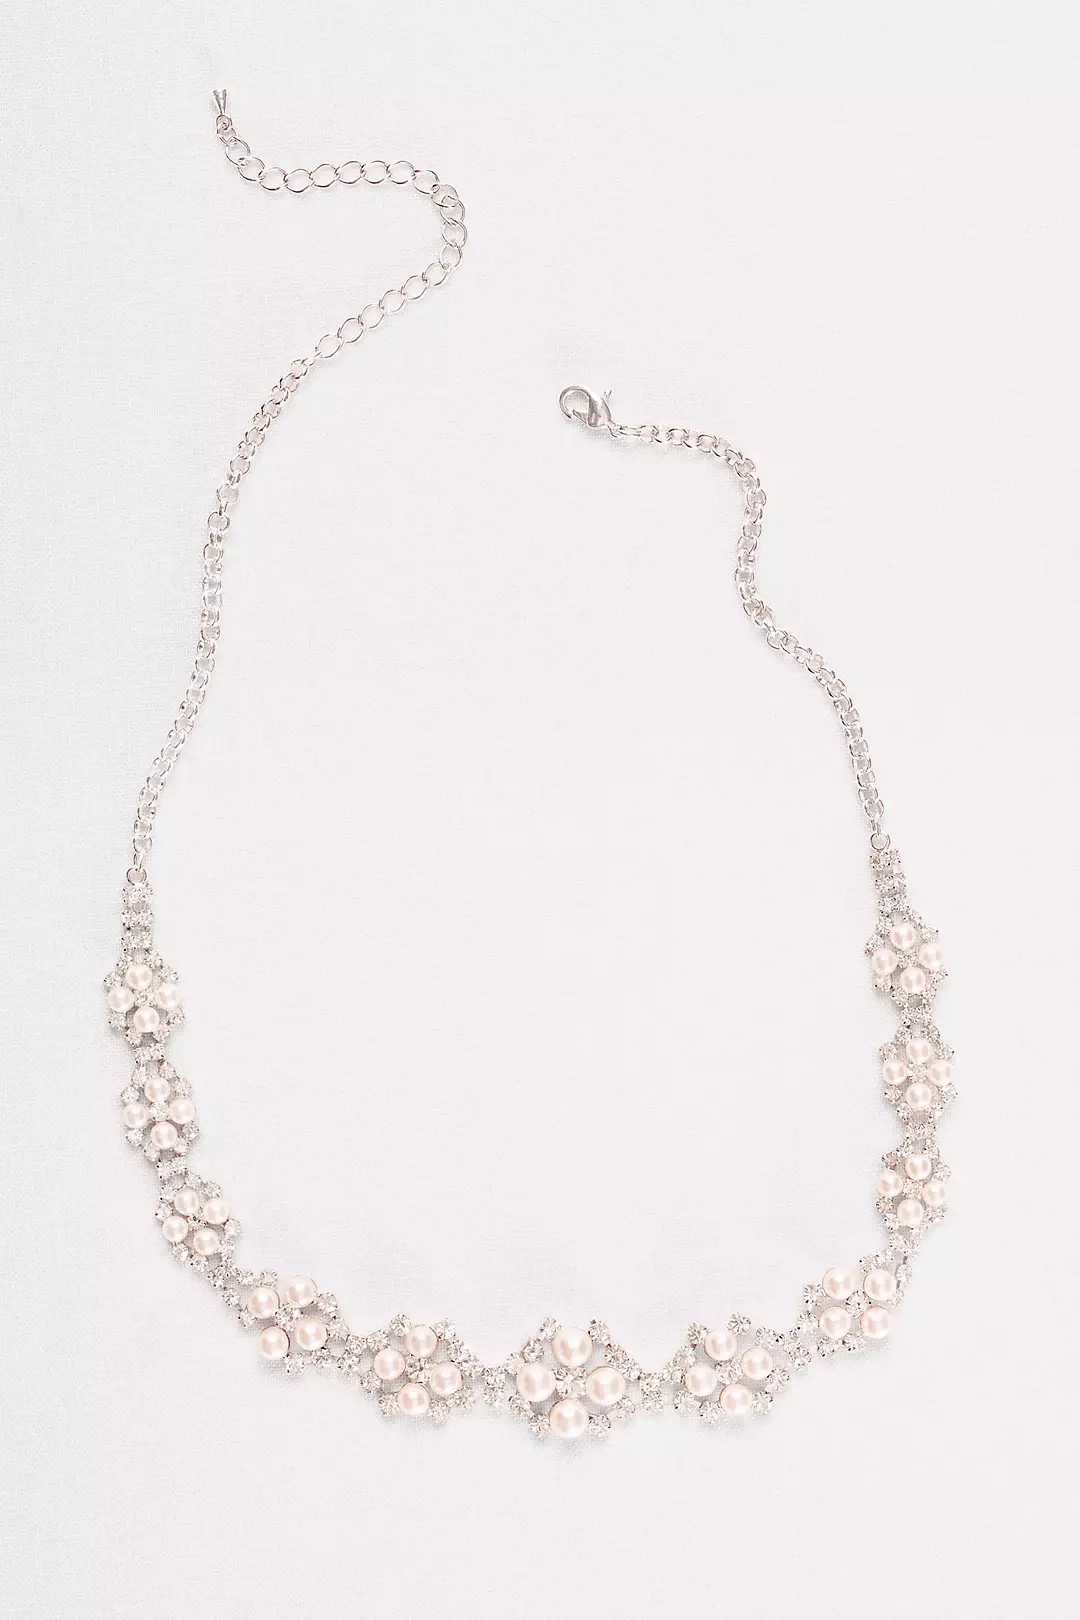 Blush Pearl and Rhinestone Cluster Necklace Image